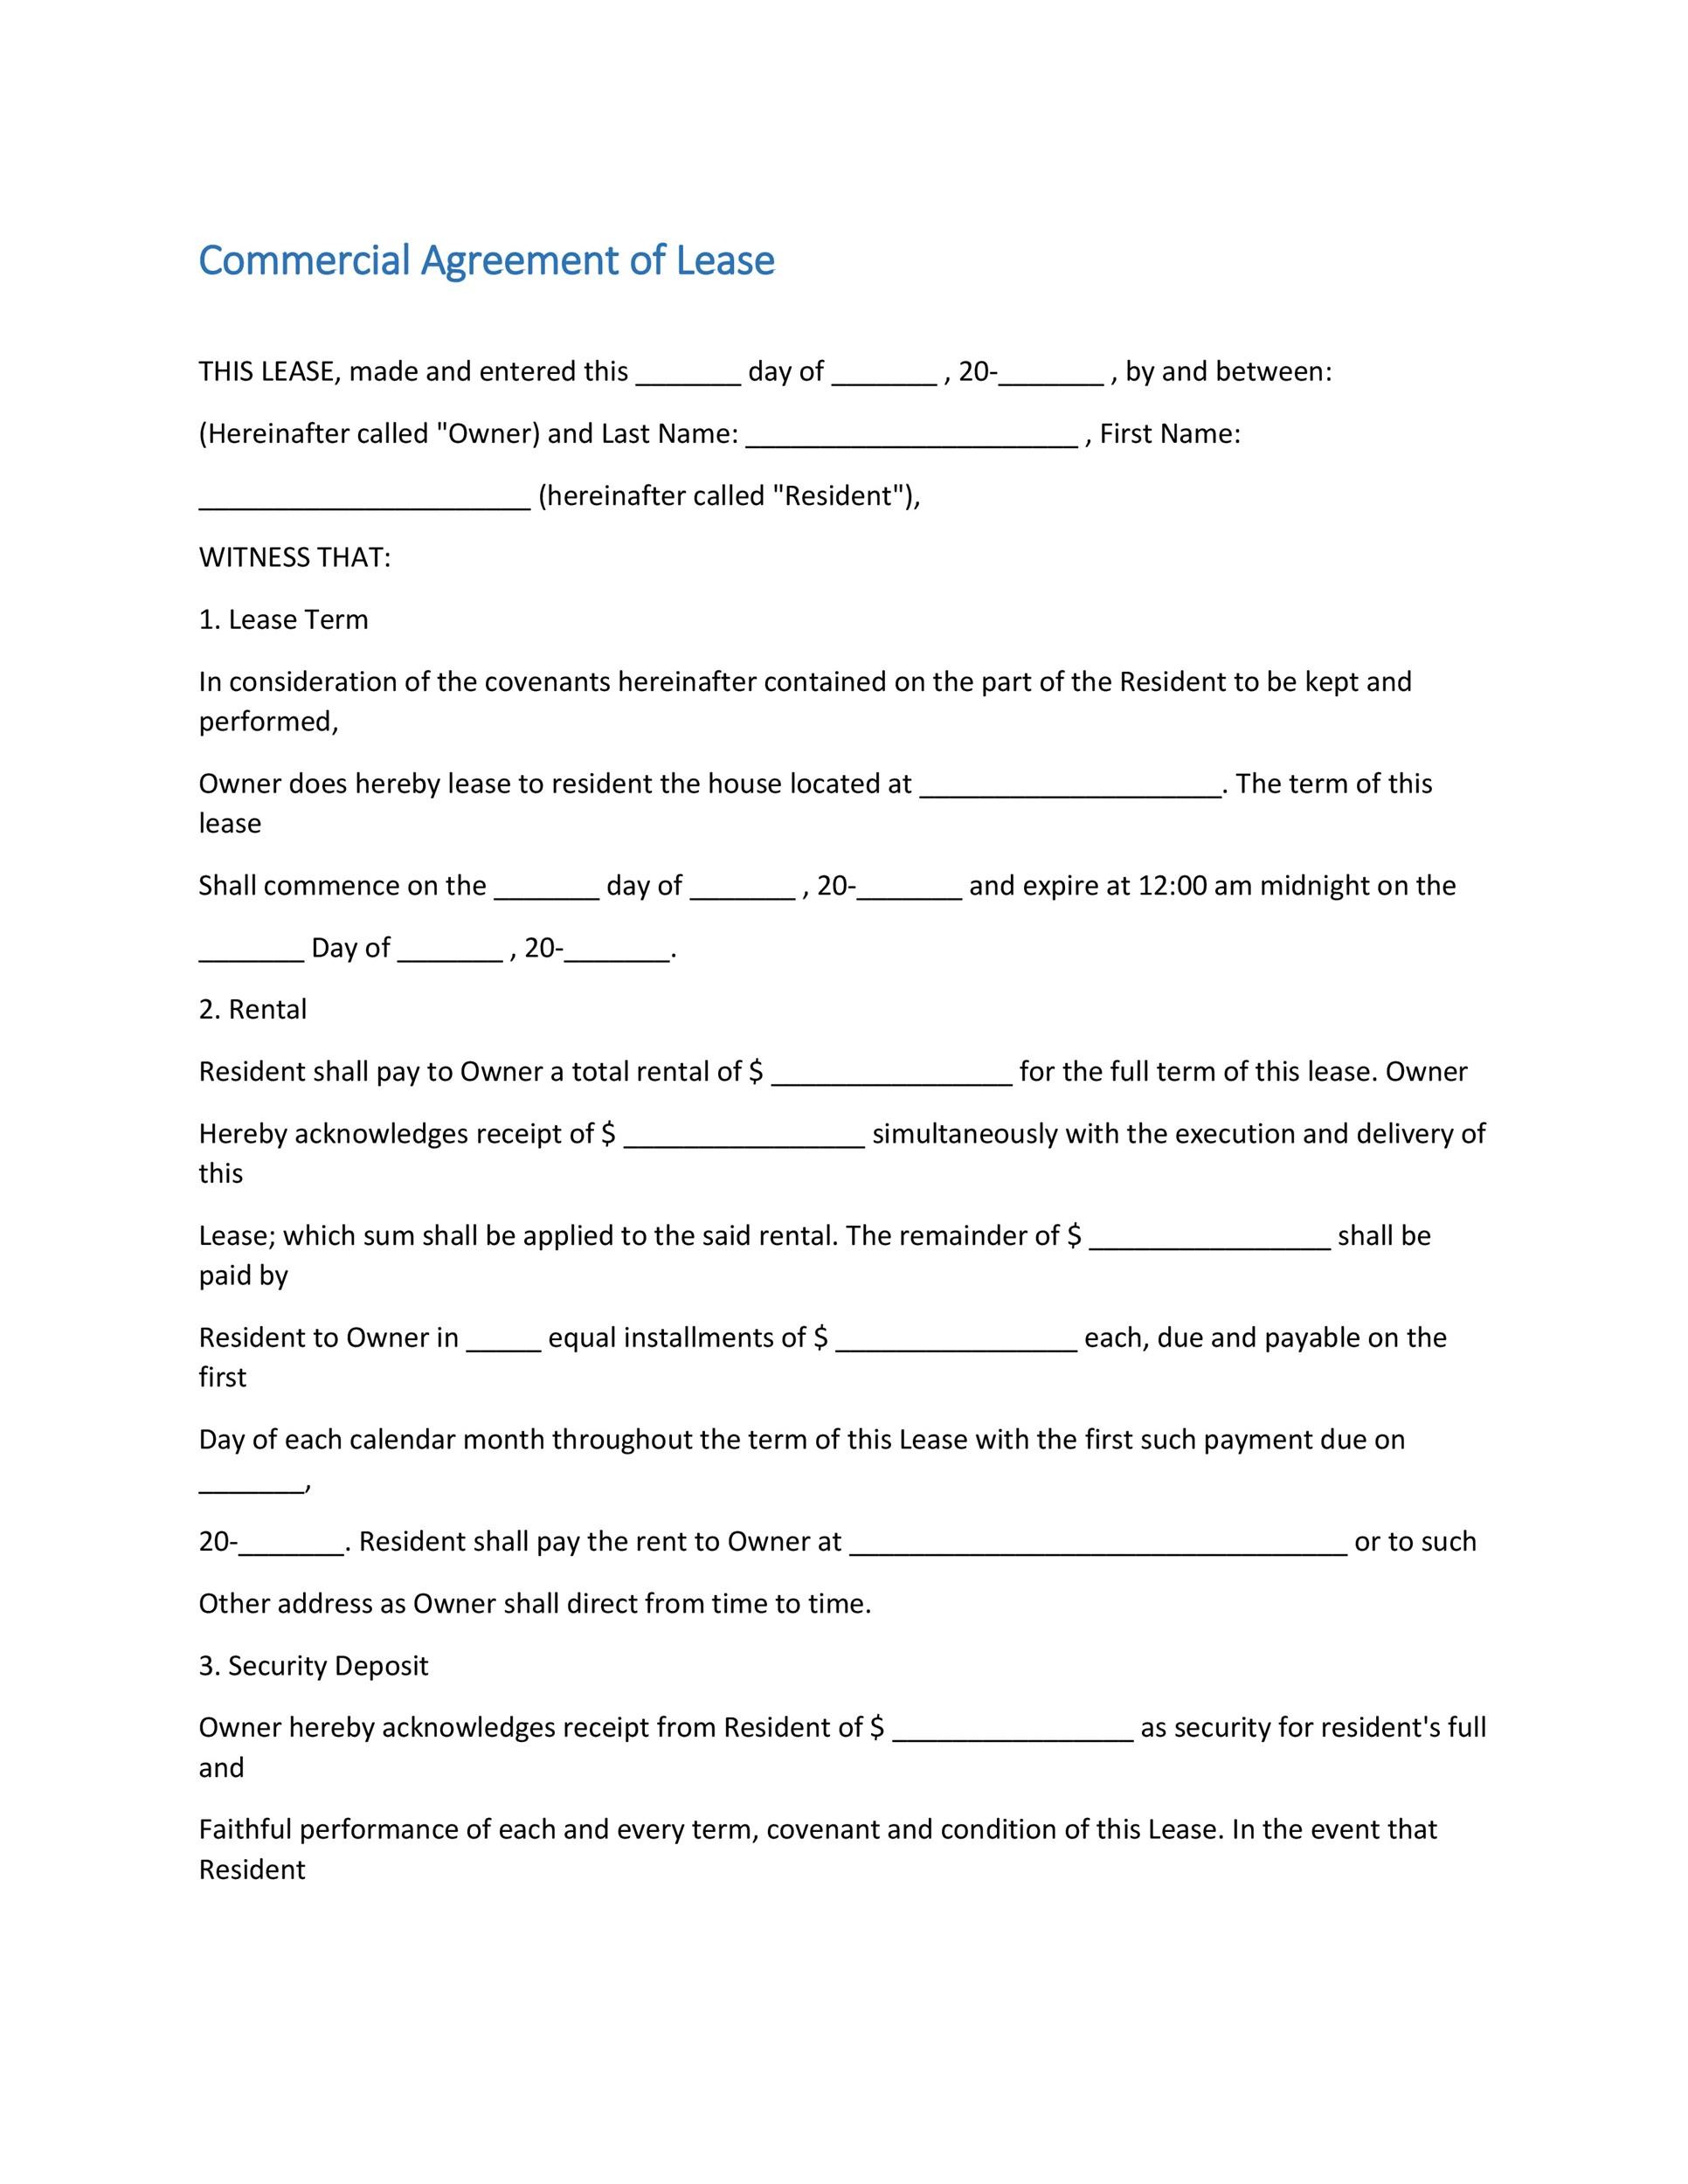 House Rental Agreement Format In English Pdf Home Sweet Home 